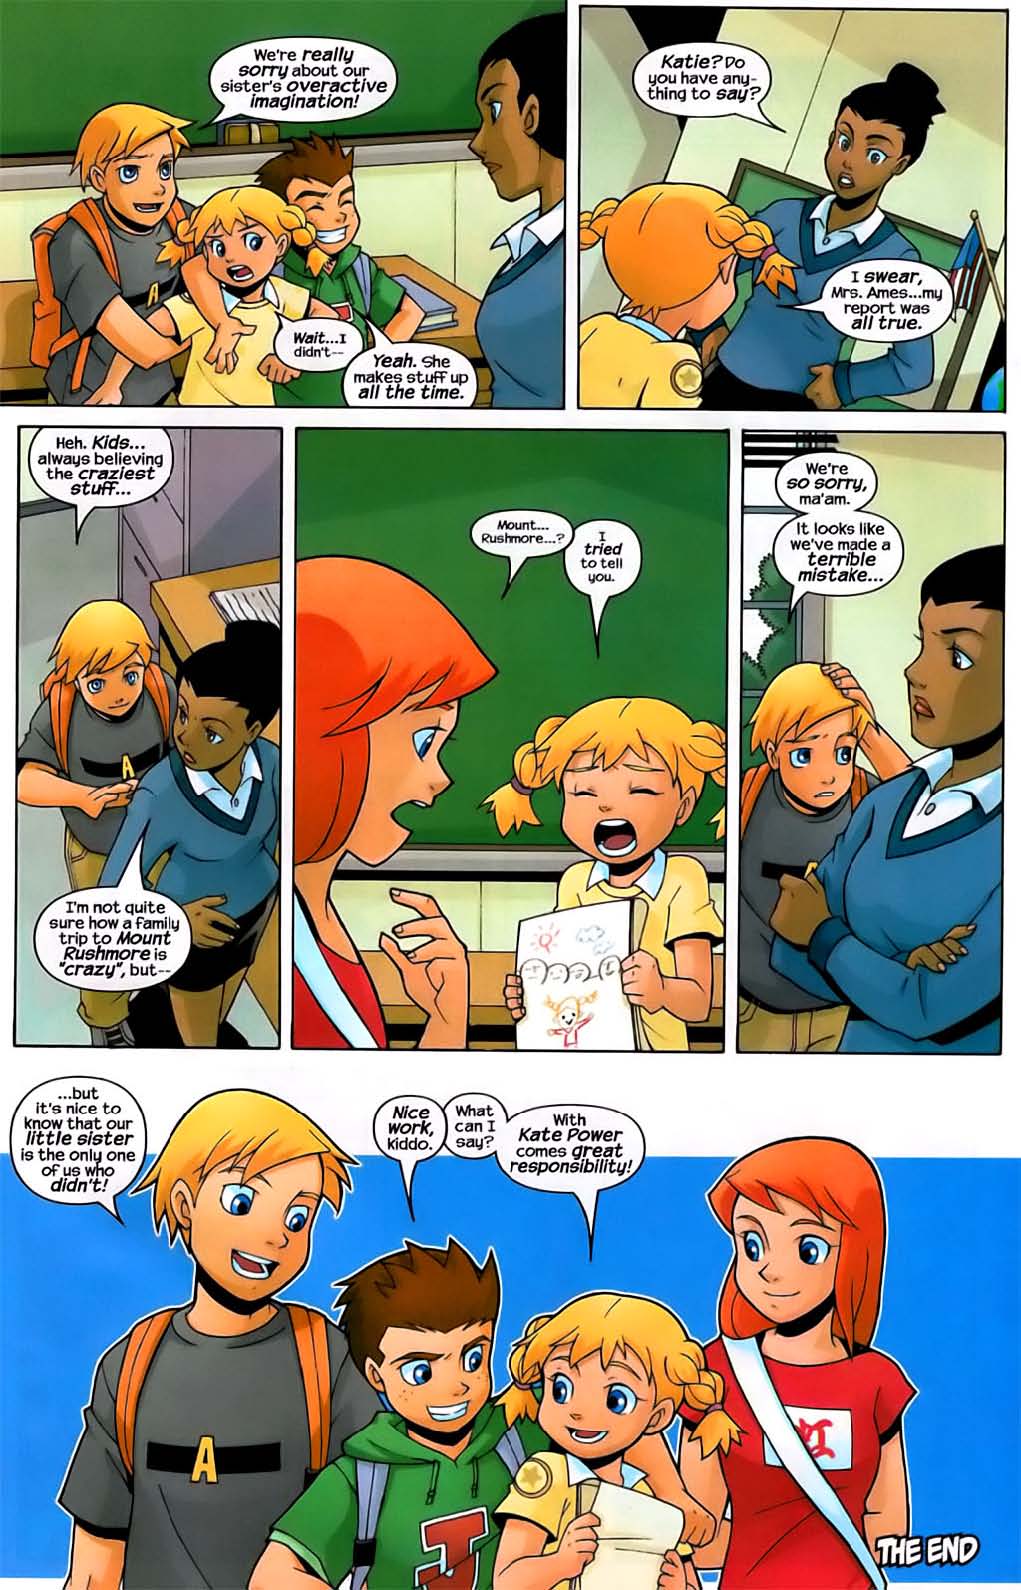 Power Pack 2005 Issue 1 Read Power Pack 2005 Issue 1 Comic Online In High Quality Read Full 